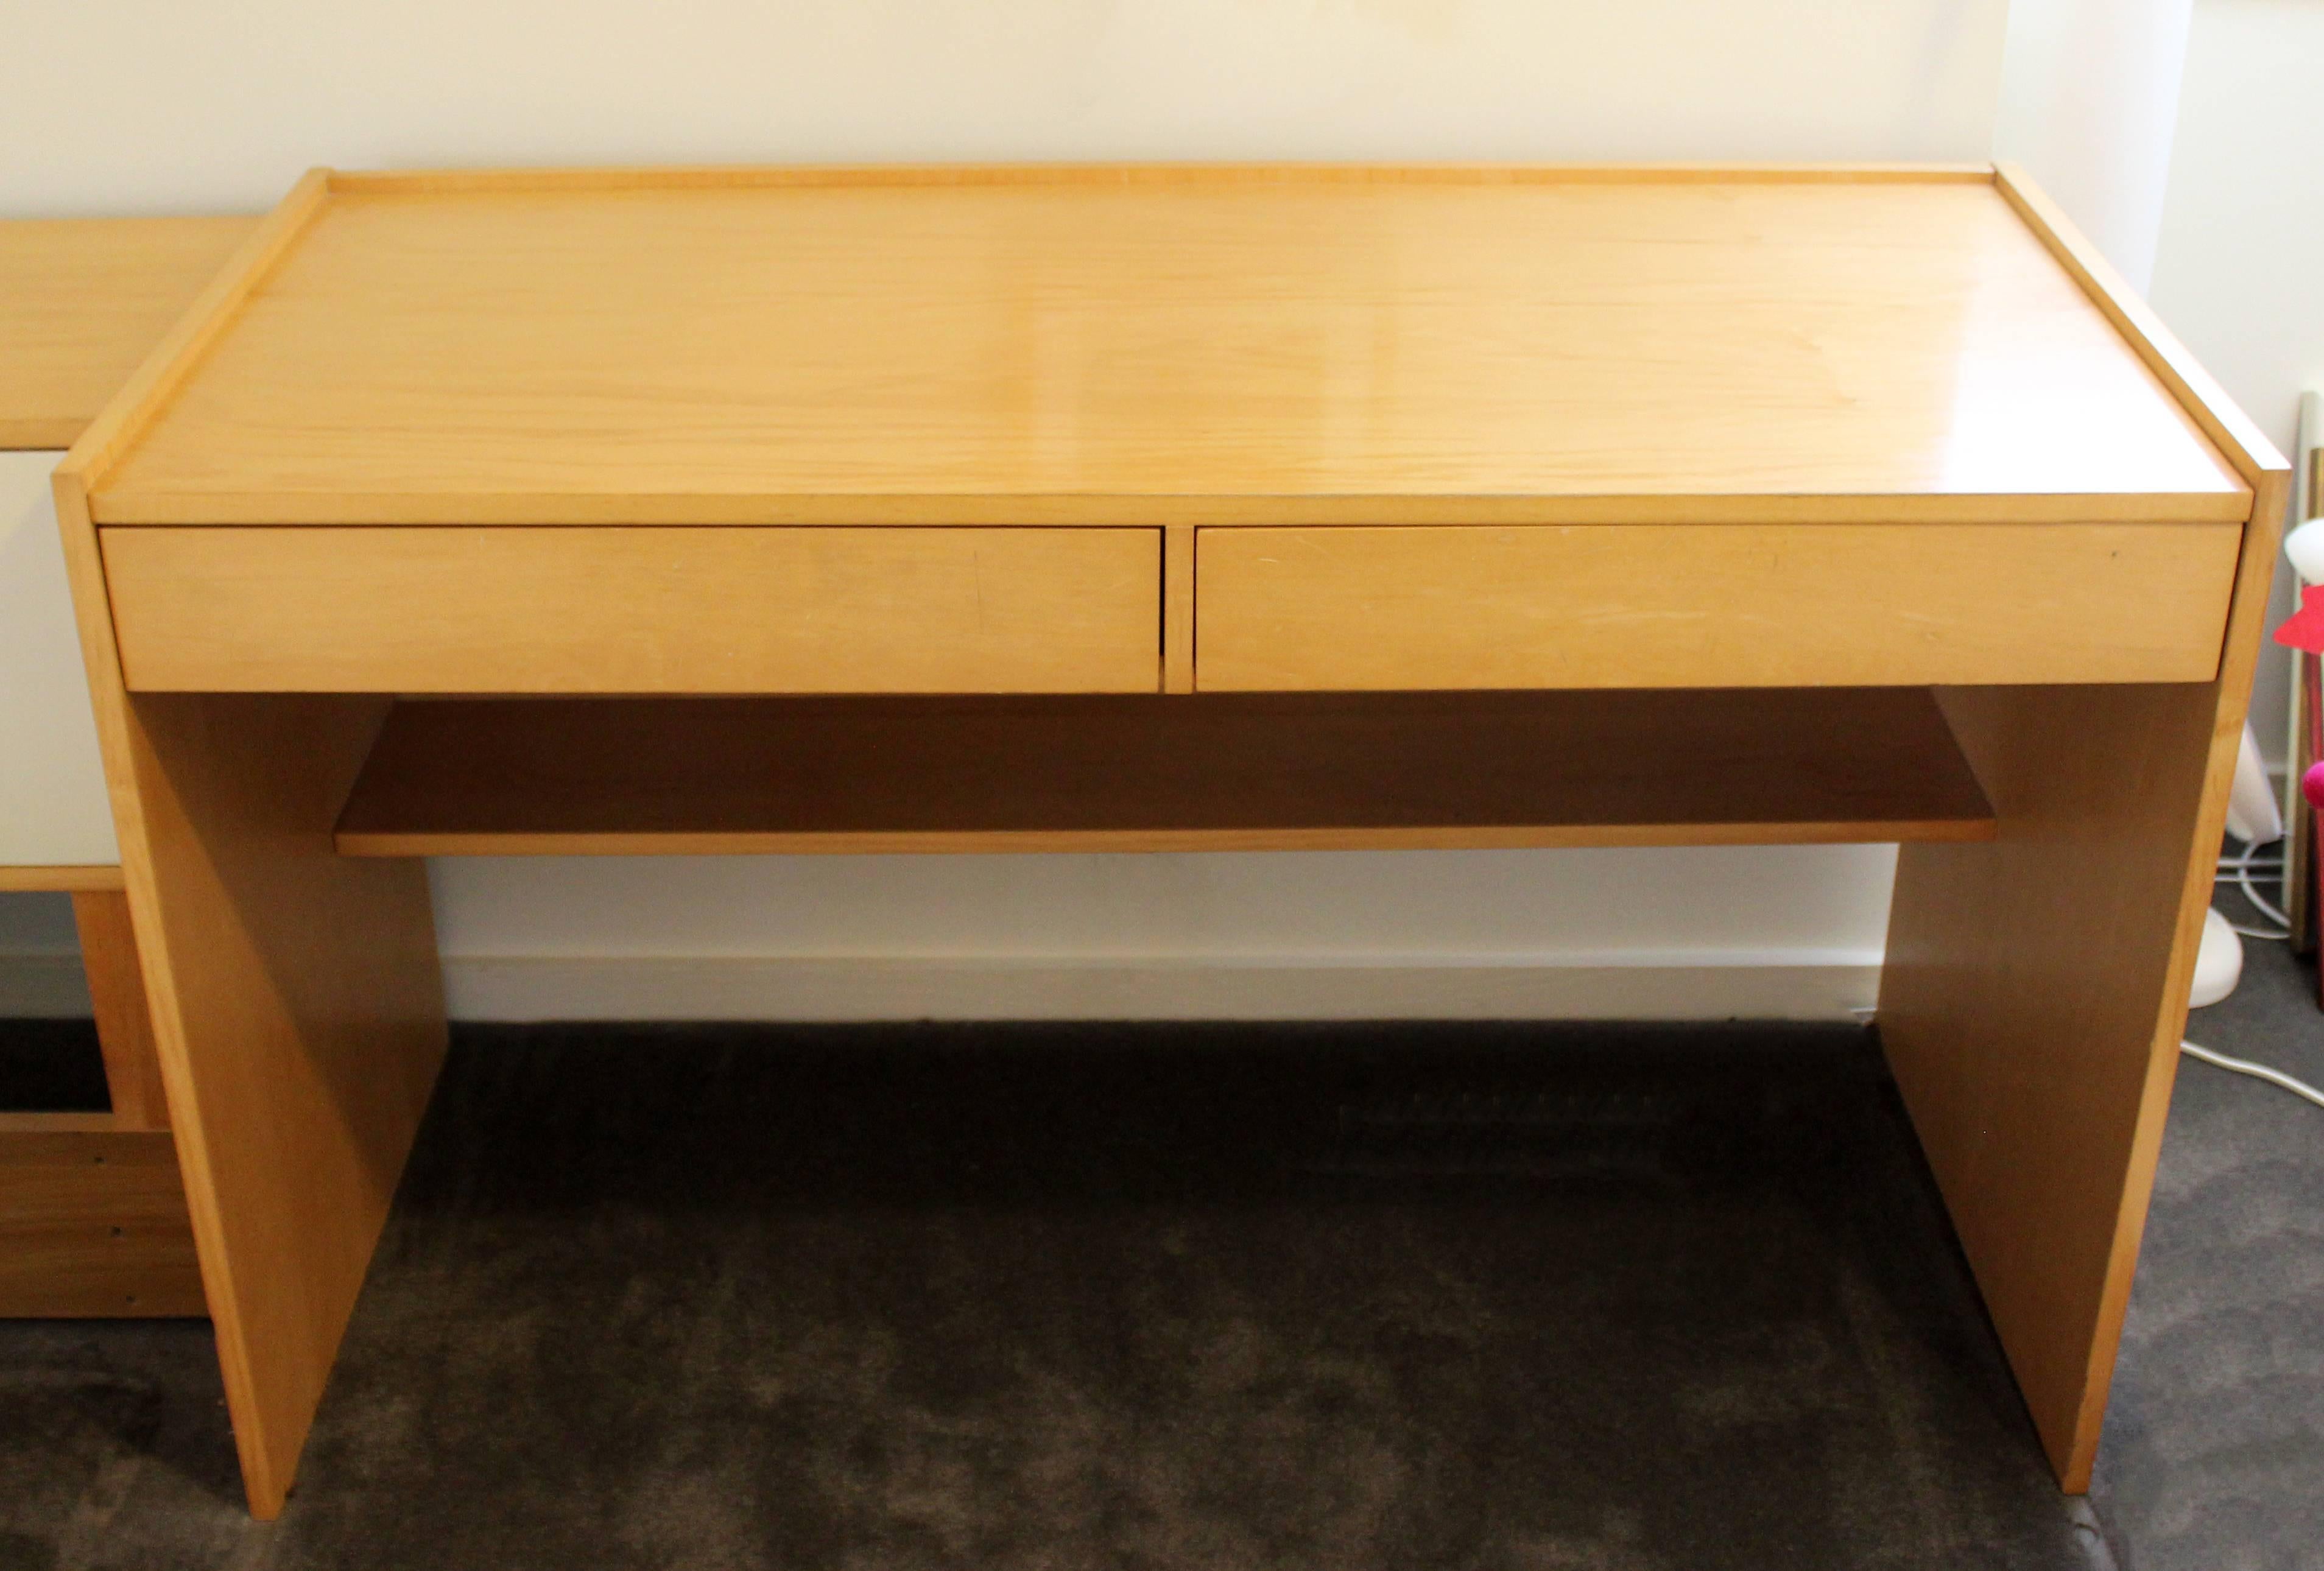 For your consideration is a beautiful, maple desk, with two drawers and a shelf, by Jack Cartwright for Founders, circa 1960s. In very good condition. The dimensions are 48